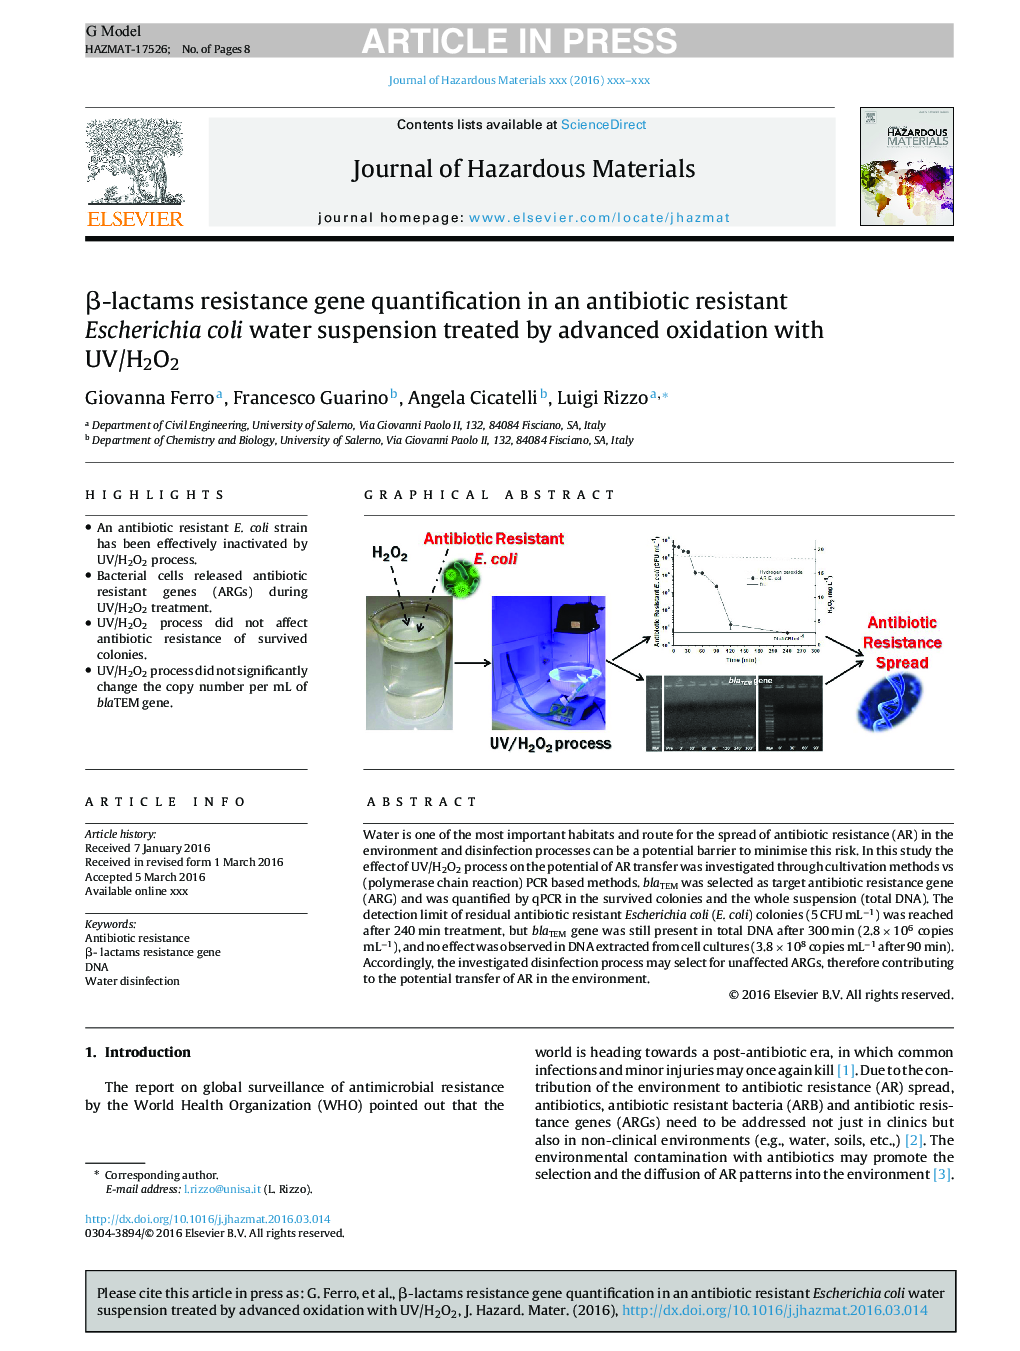 Î²-lactams resistance gene quantification in an antibiotic resistant Escherichia coli water suspension treated by advanced oxidation with UV/H2O2